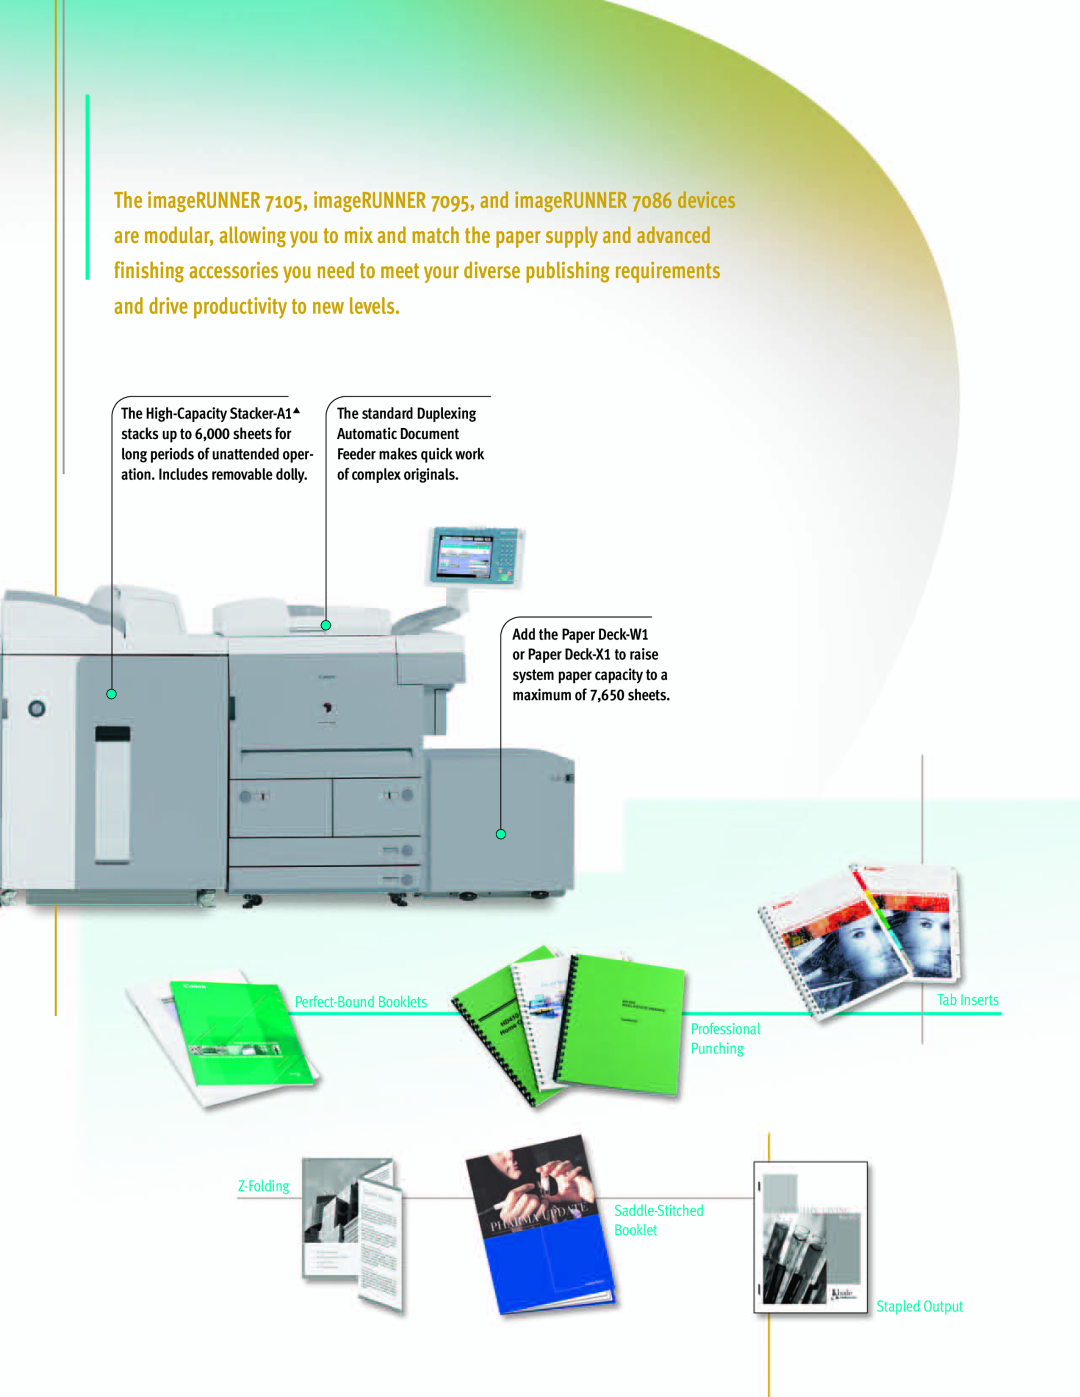 Canon 7095, 7105 Perfect-Bound Booklets, Professional Punching Z-Folding Saddle-Stitched Booklet, Stapled Output 